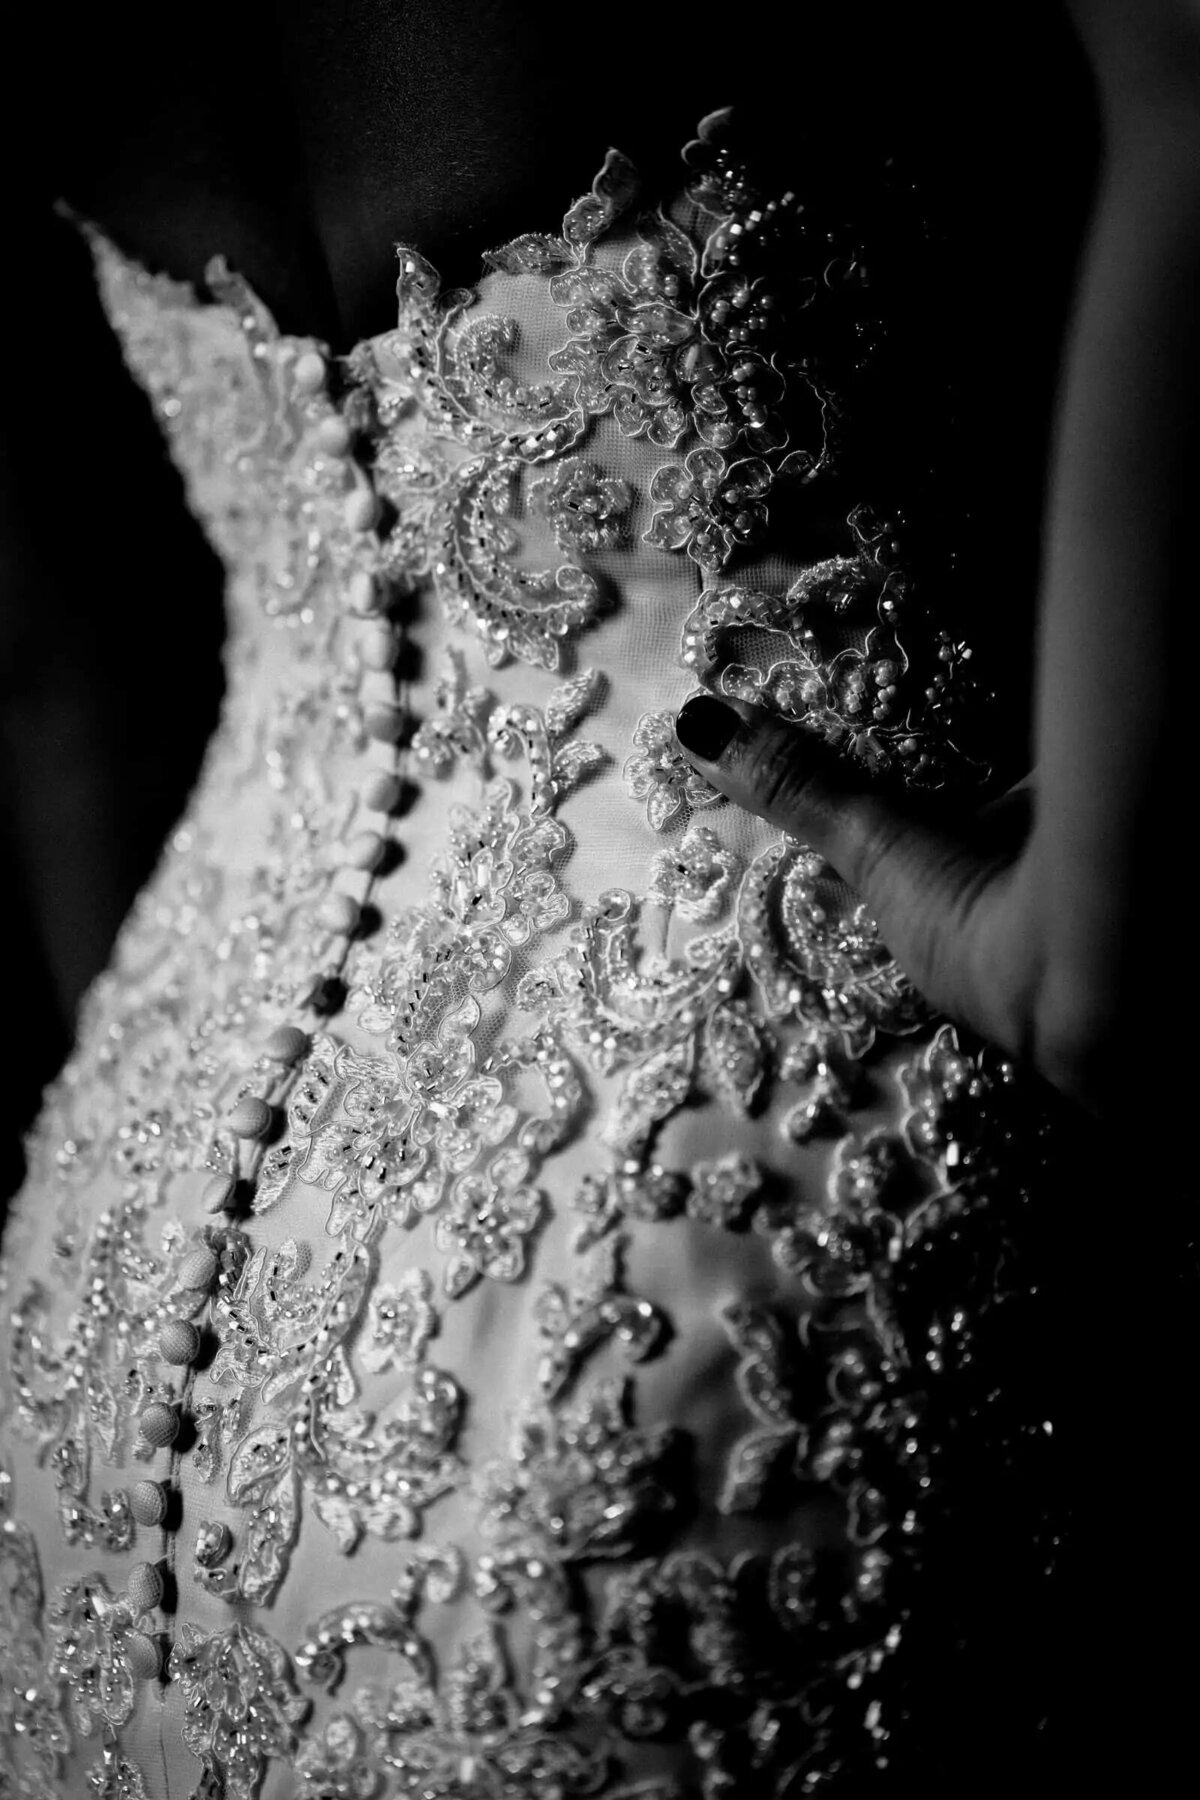 An intimate detail shot of a bride's wedding dress, focusing on the intricate lace and button details, set against a soft-focus black and white background.